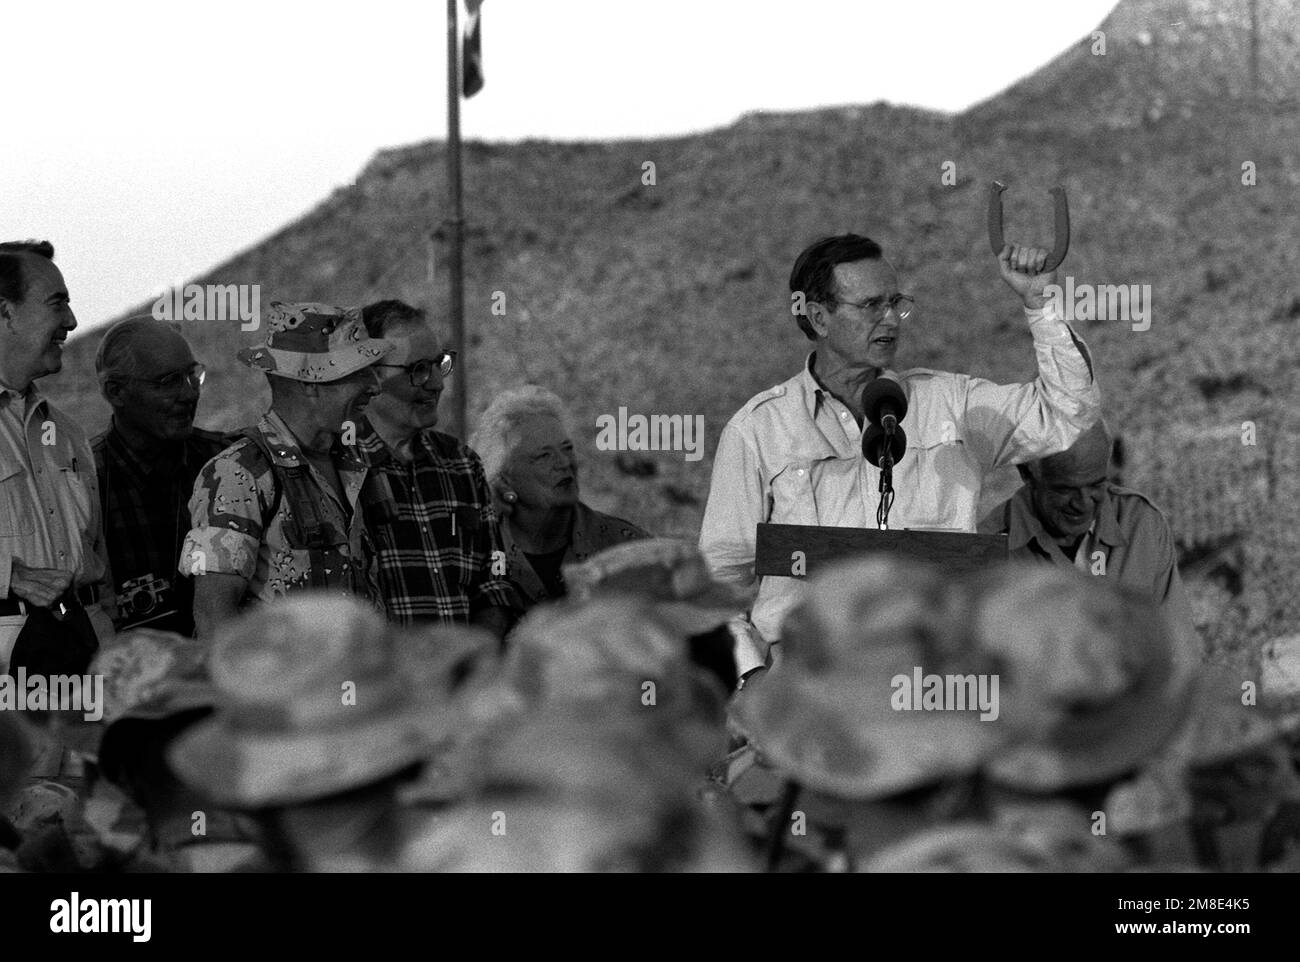 With his wife, Barbara, beside him, President George Bush holds up a horseshoe as he speaks from the back of a truck during his Thanksgiving Day visit to the lst Marine Division combat operations center (COC) during Operation Desert Shield. Also on the truck are Sen. Robert Dole, left, and Speaker of the House Tom Foley, right.. Subject Operation/Series: DESERT SHIELD Country: Saudi Arabia(SAU) Stock Photo